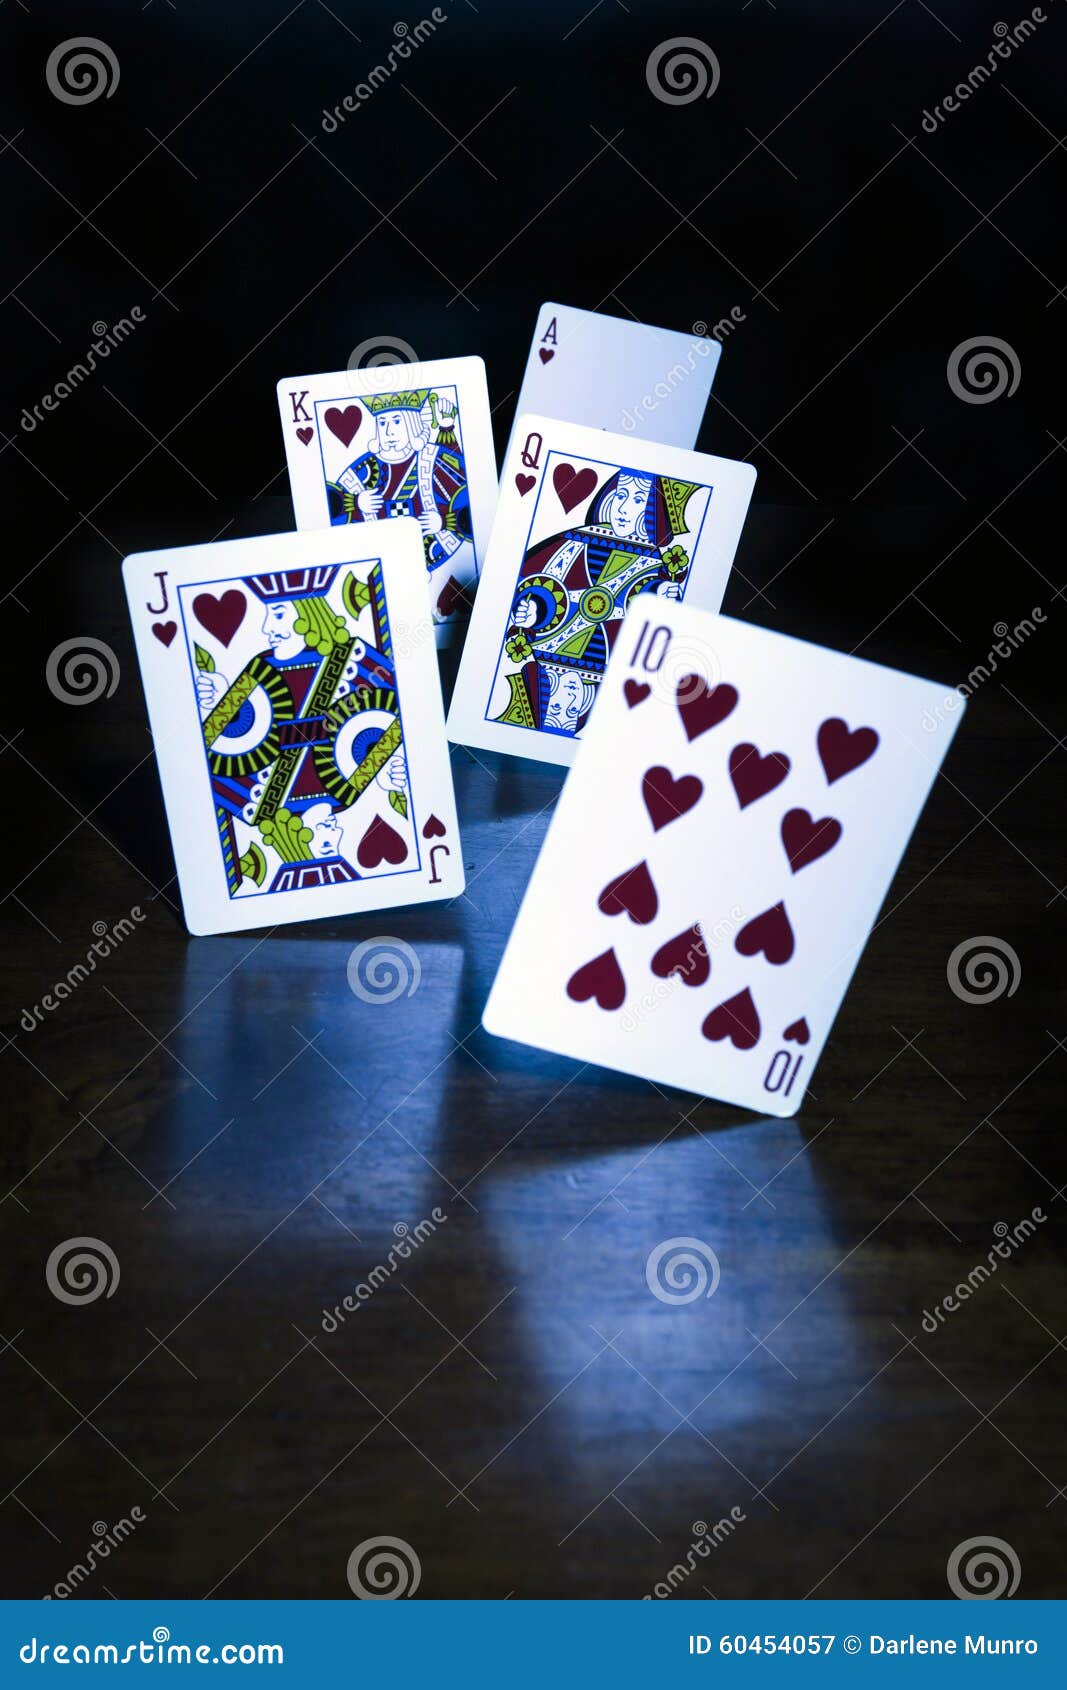 Illusion Game Cards Download